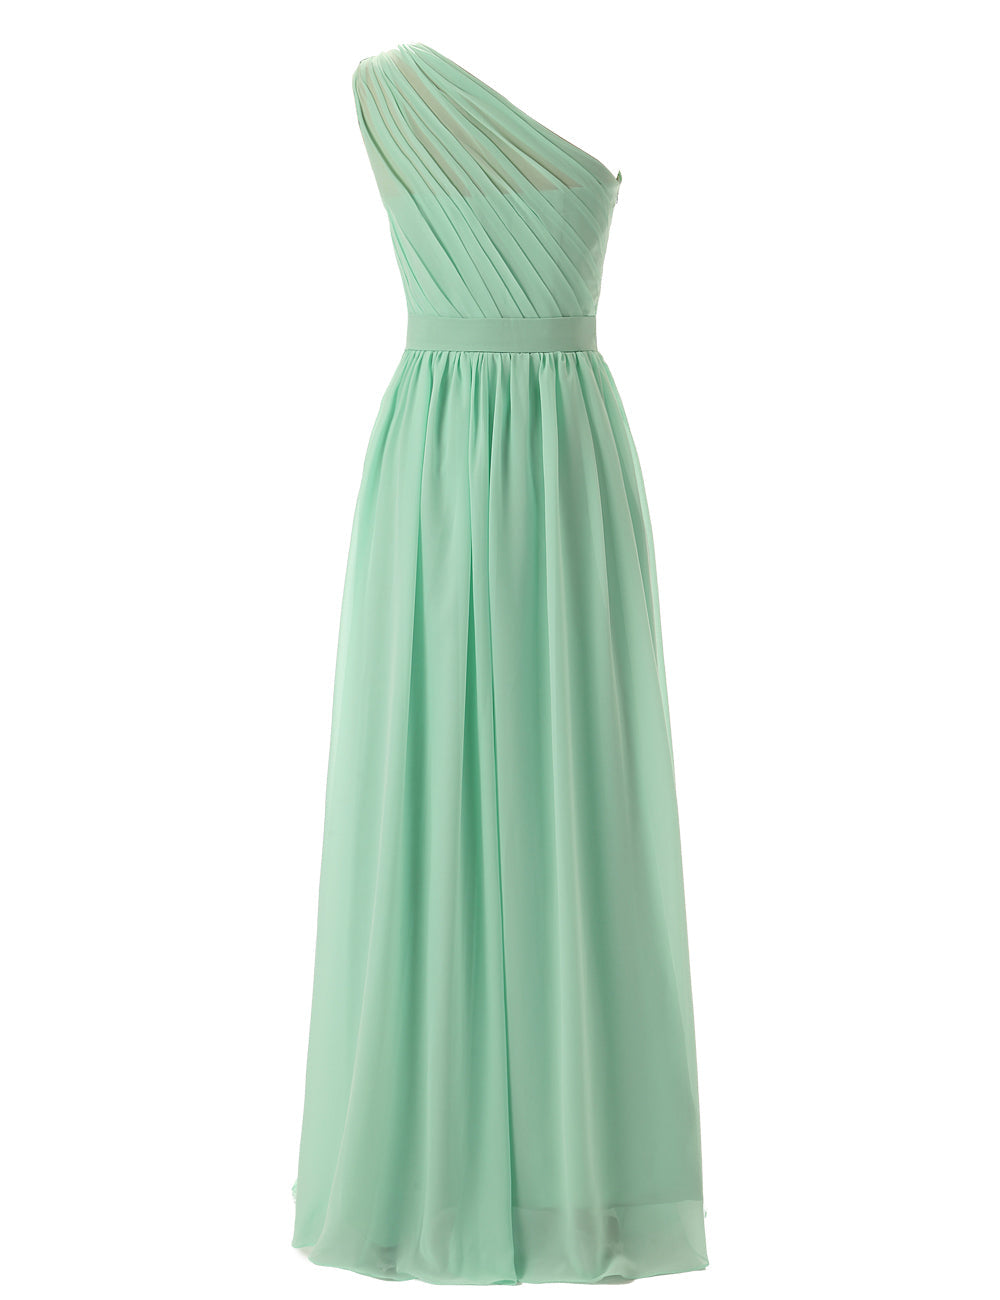 Party Dresses Halter Neck, Simple A-Line Chiffon Ruched Mint Green Long Bridesmaid Dress